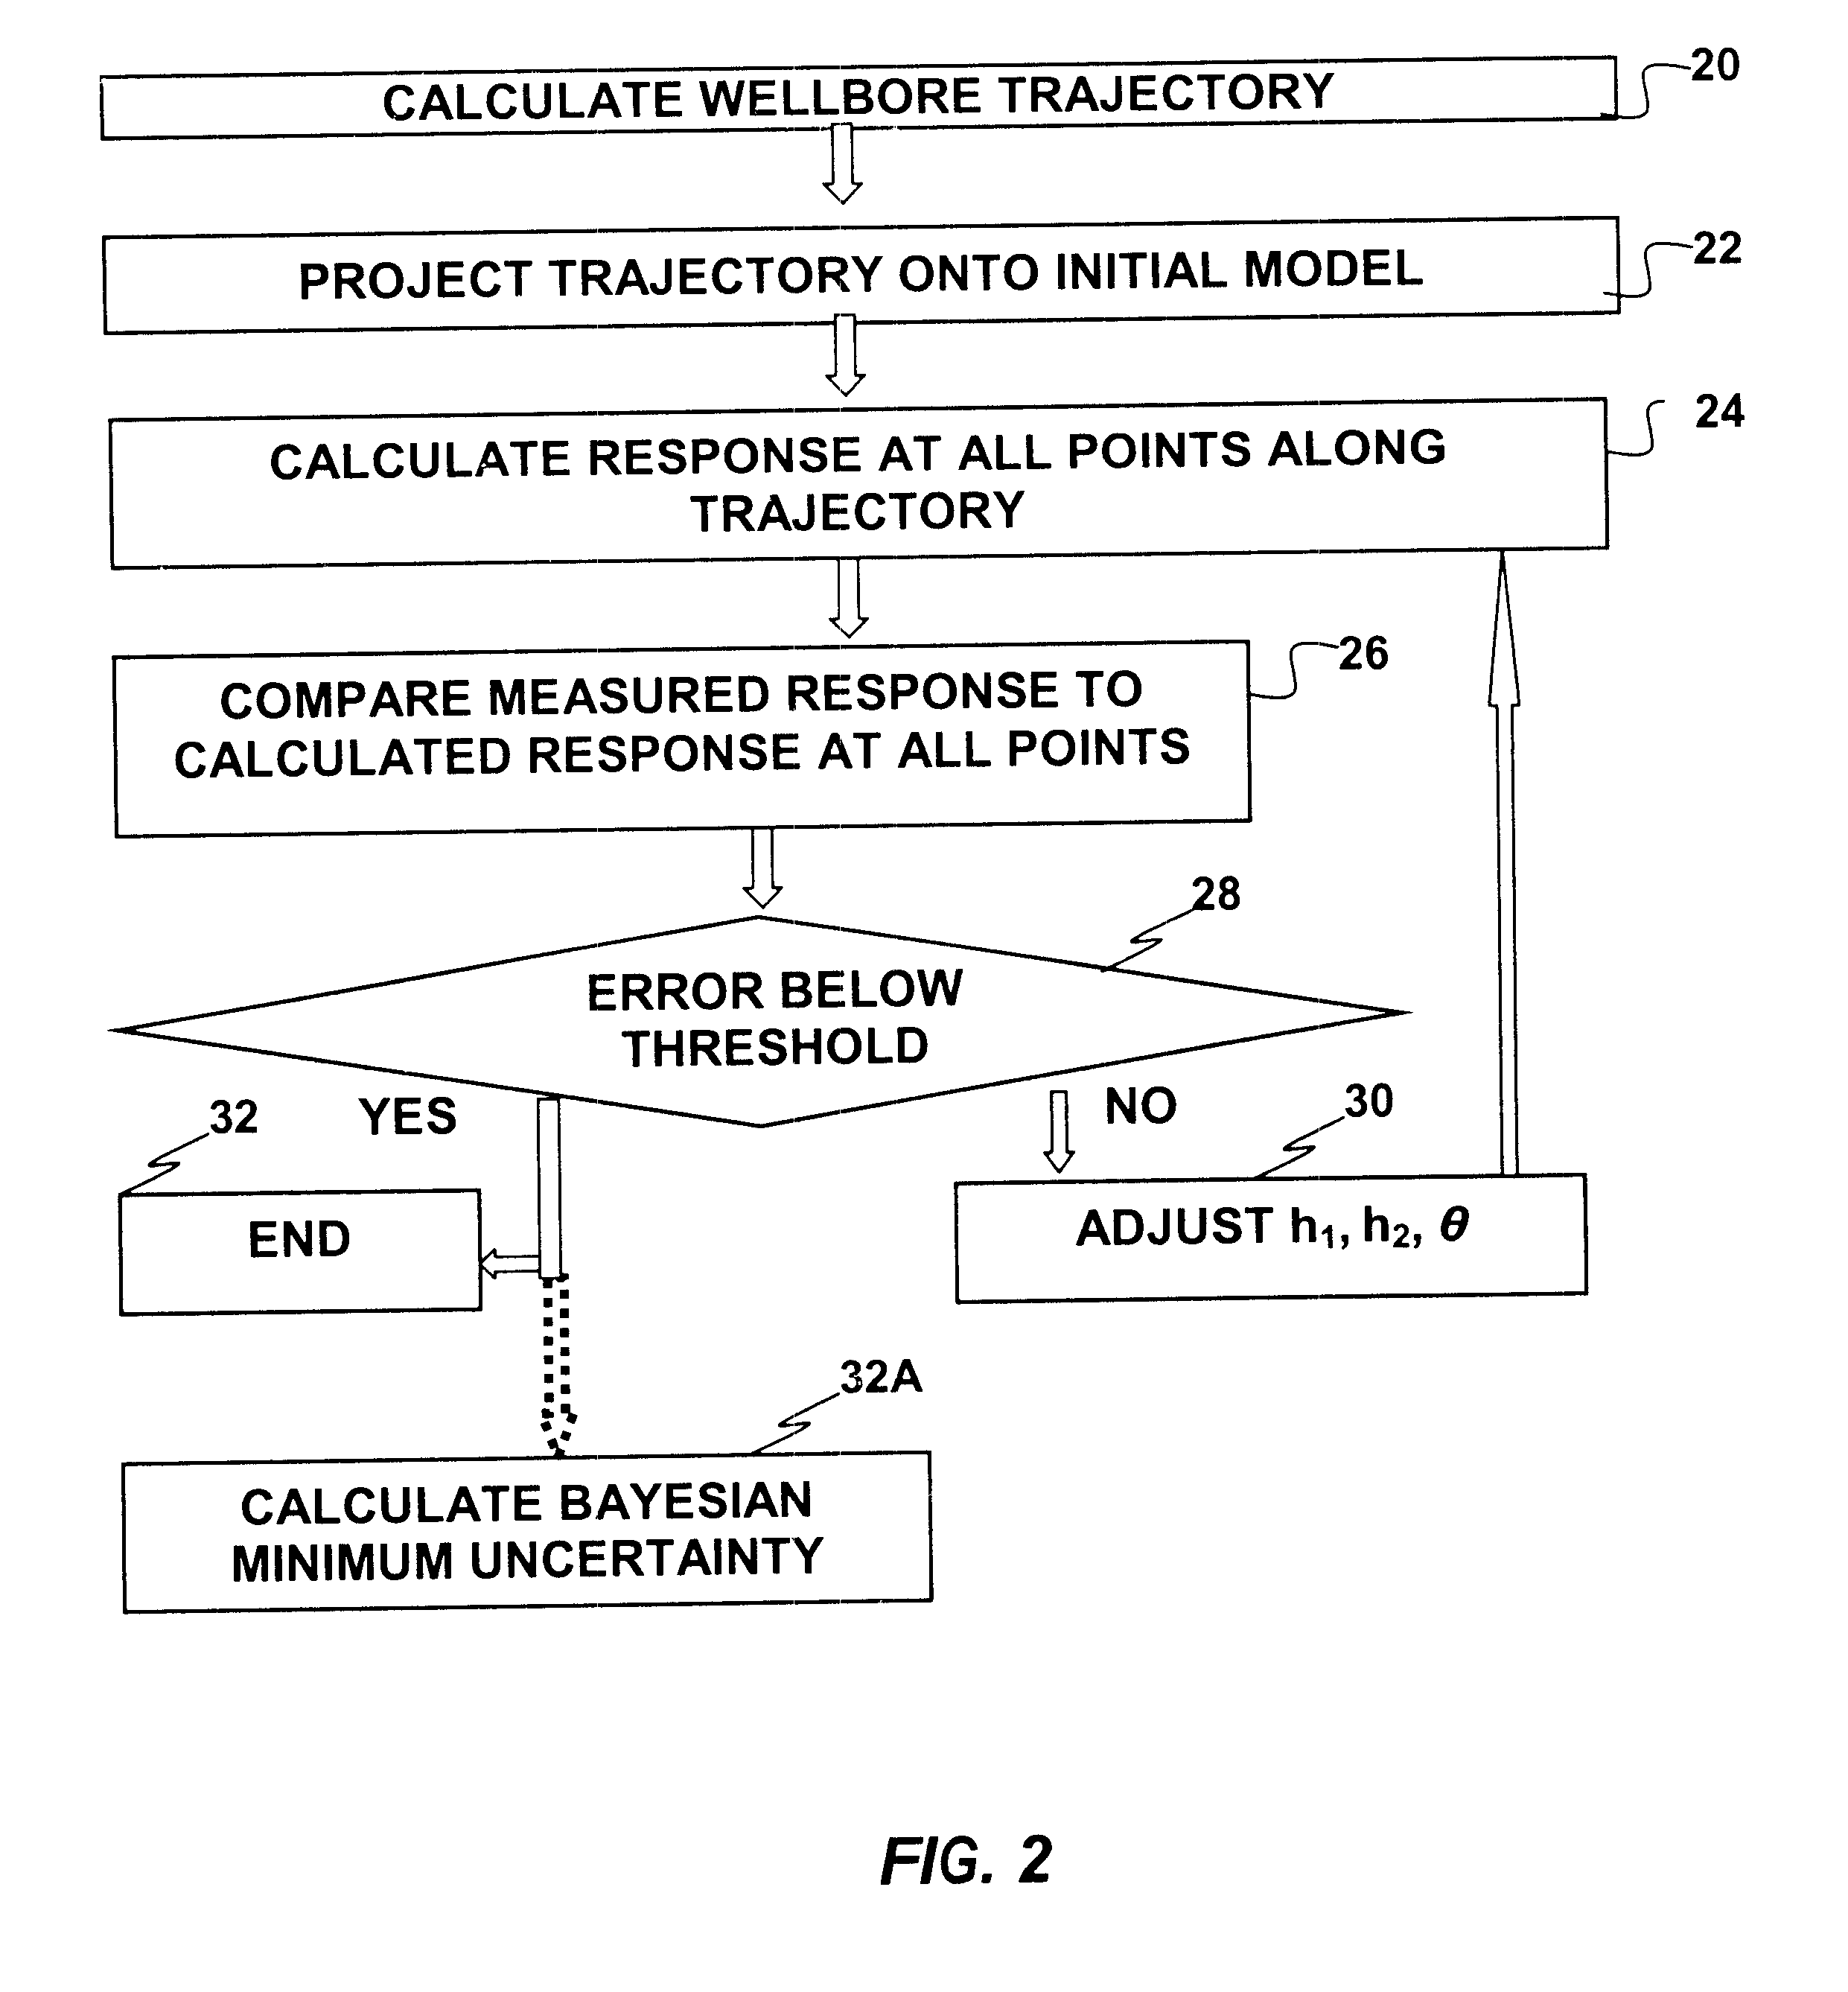 Method for calculating a distance between a well logging instrument and a formation boundary by inversion processing measurements from the logging instrument